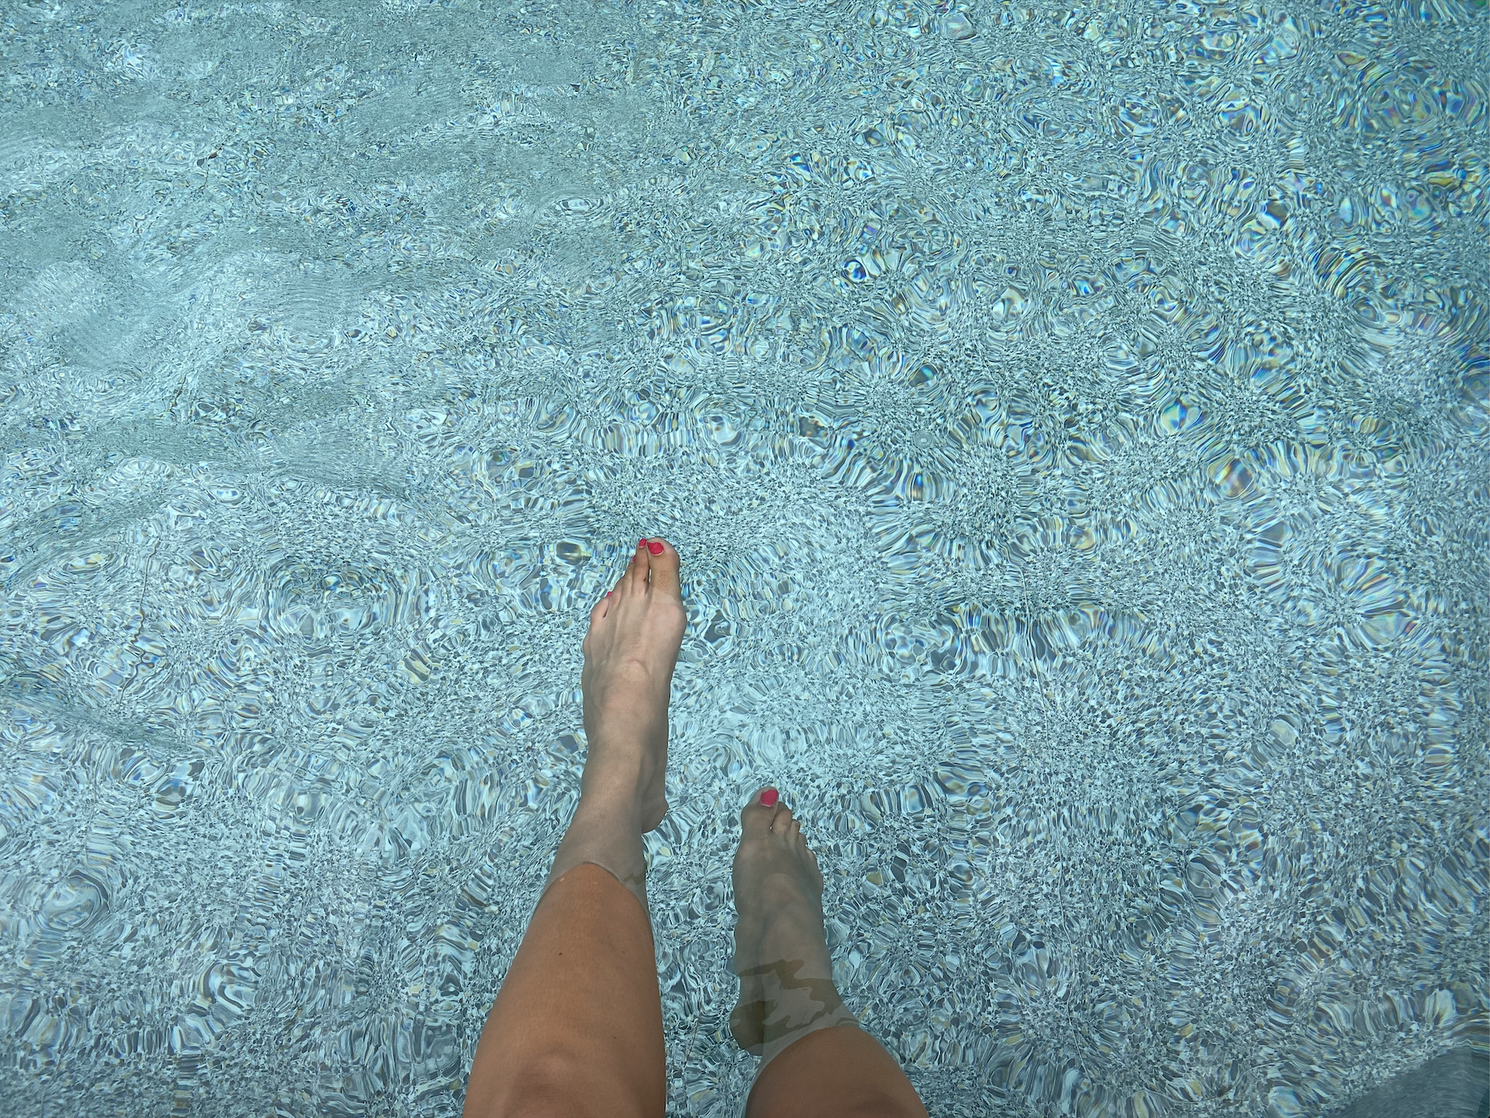 The writer's legs in a pool